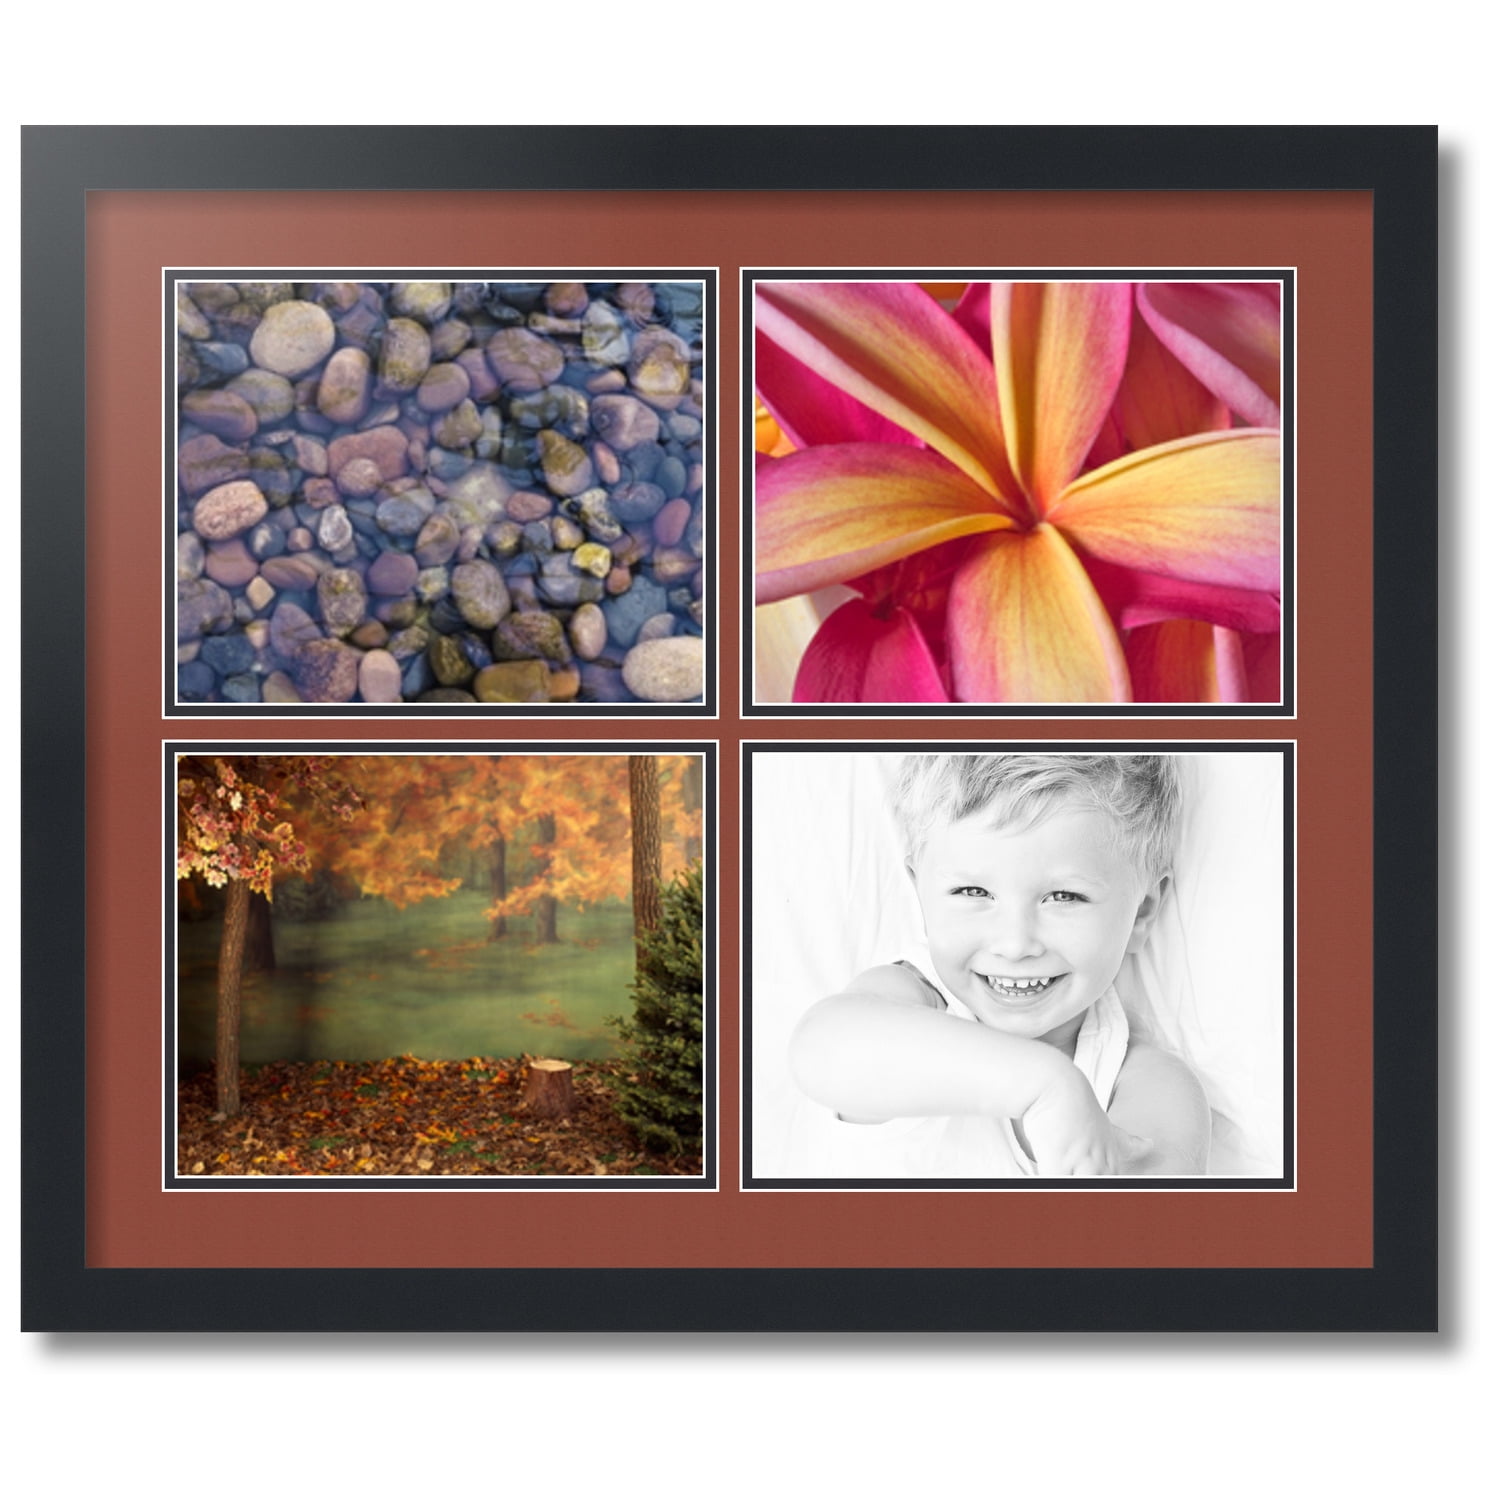 ArtToFrames Collage Photo Picture Frame with 3 - 4x10 Openings, Framed in Black with Super White and Black Mats (cdm-3926-67)